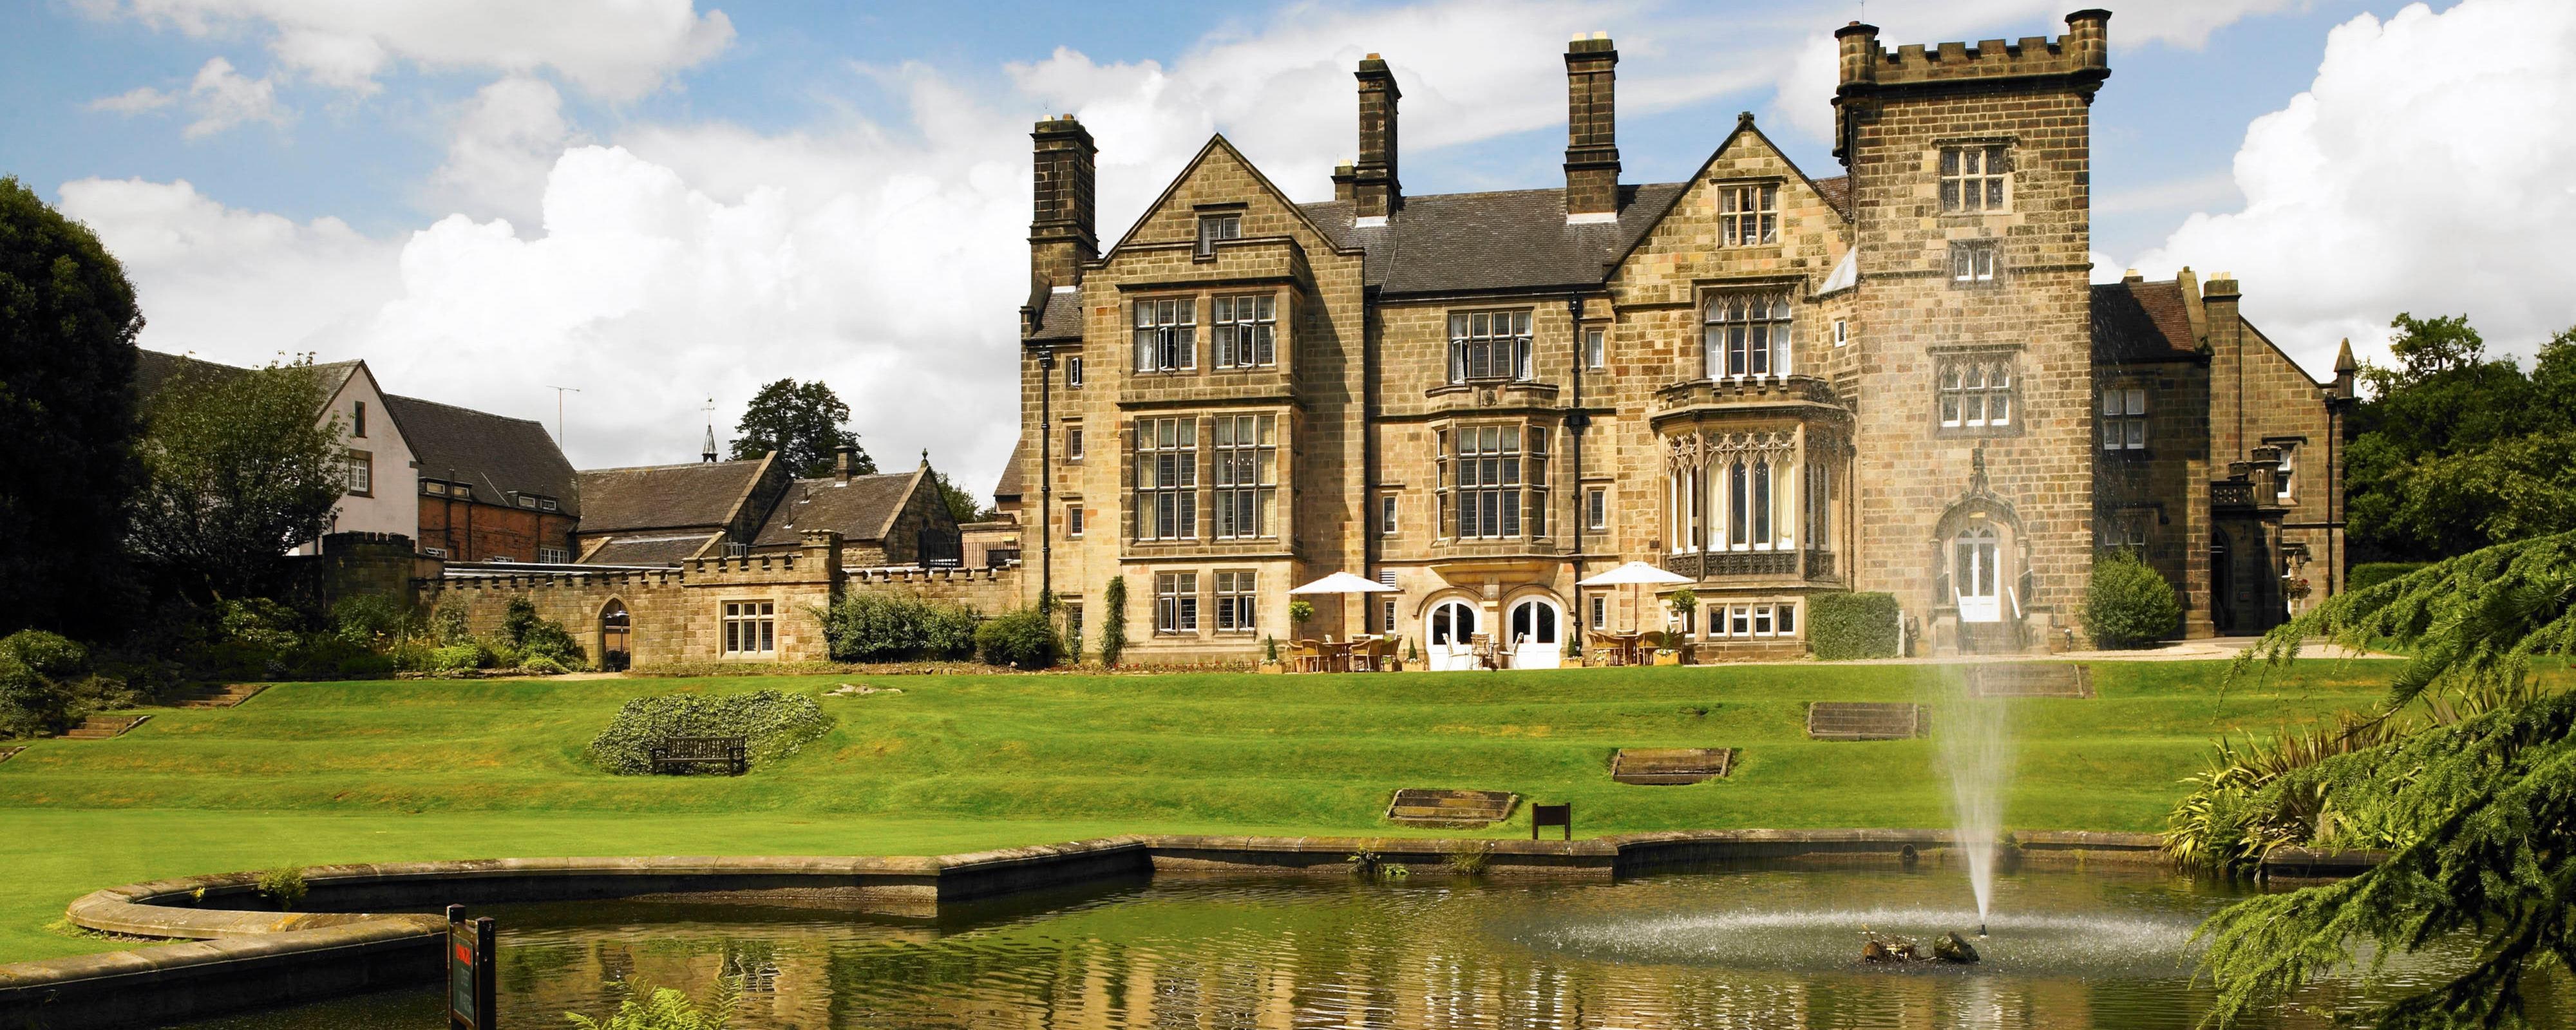 Image for Breadsall Priory Marriott Hotel & Country Club, a Marriott hotel.